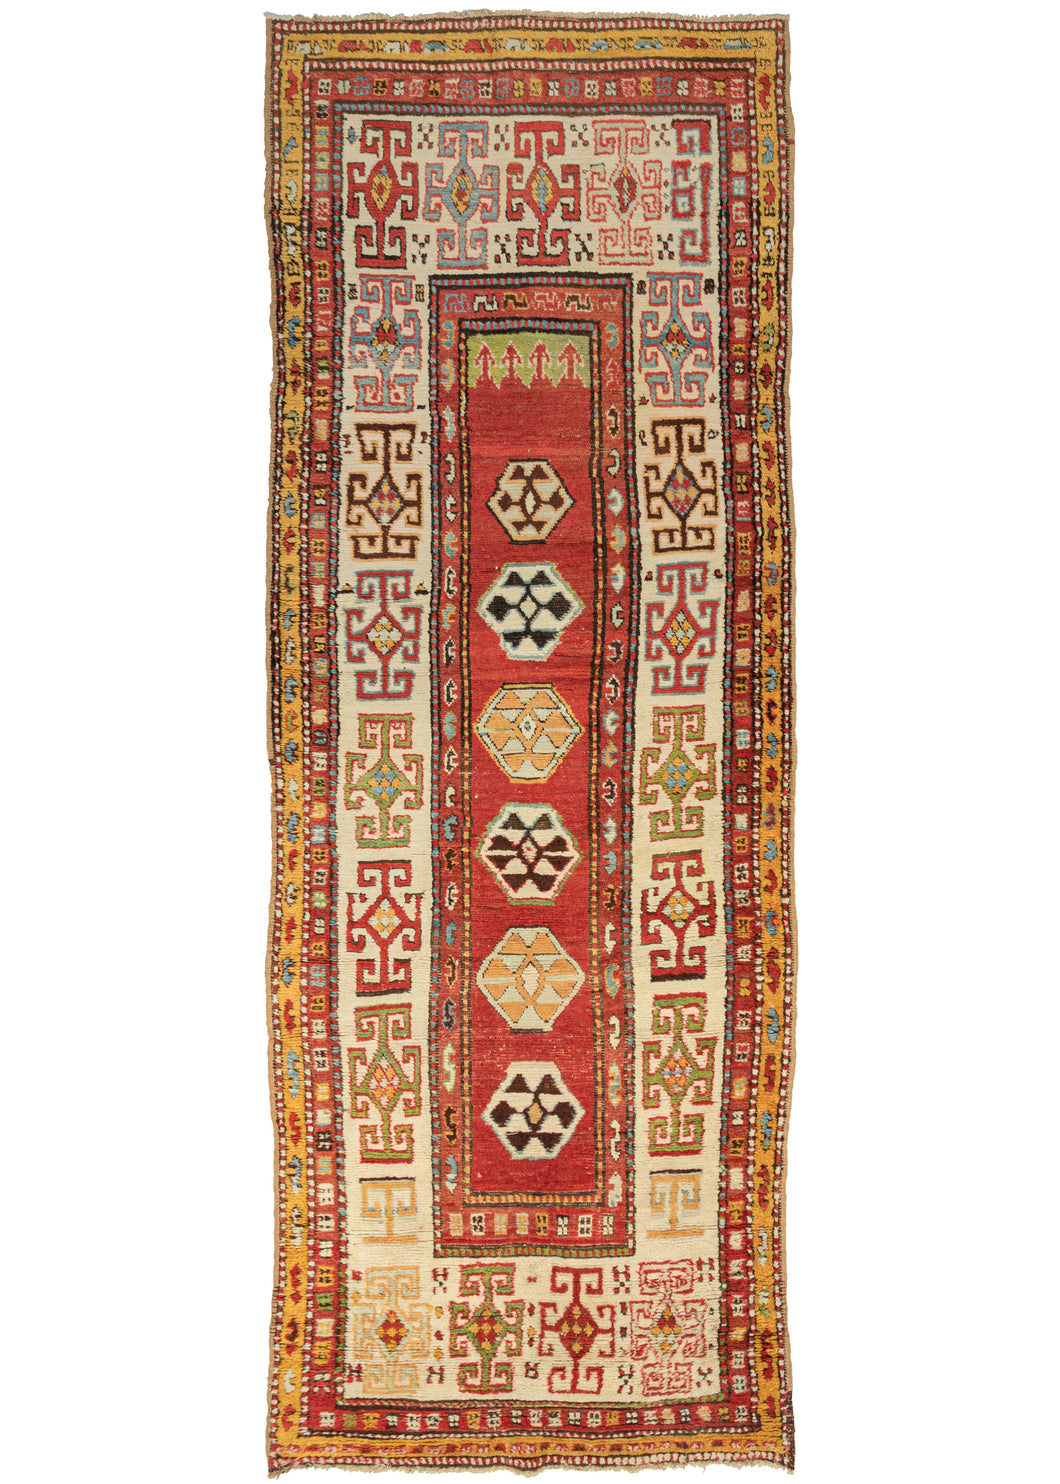 This Kazak Runner features a thin field of polygons on a red ground with arrows near a small green section at the top giving the pattern subtle directionality. The polygons are filled with protection symbols and slightly shift in scale unintentionally. It is framed by a very wide and relatively bright ivory main border with large-scale geometric devices in red, yellow, green, and icy blue.